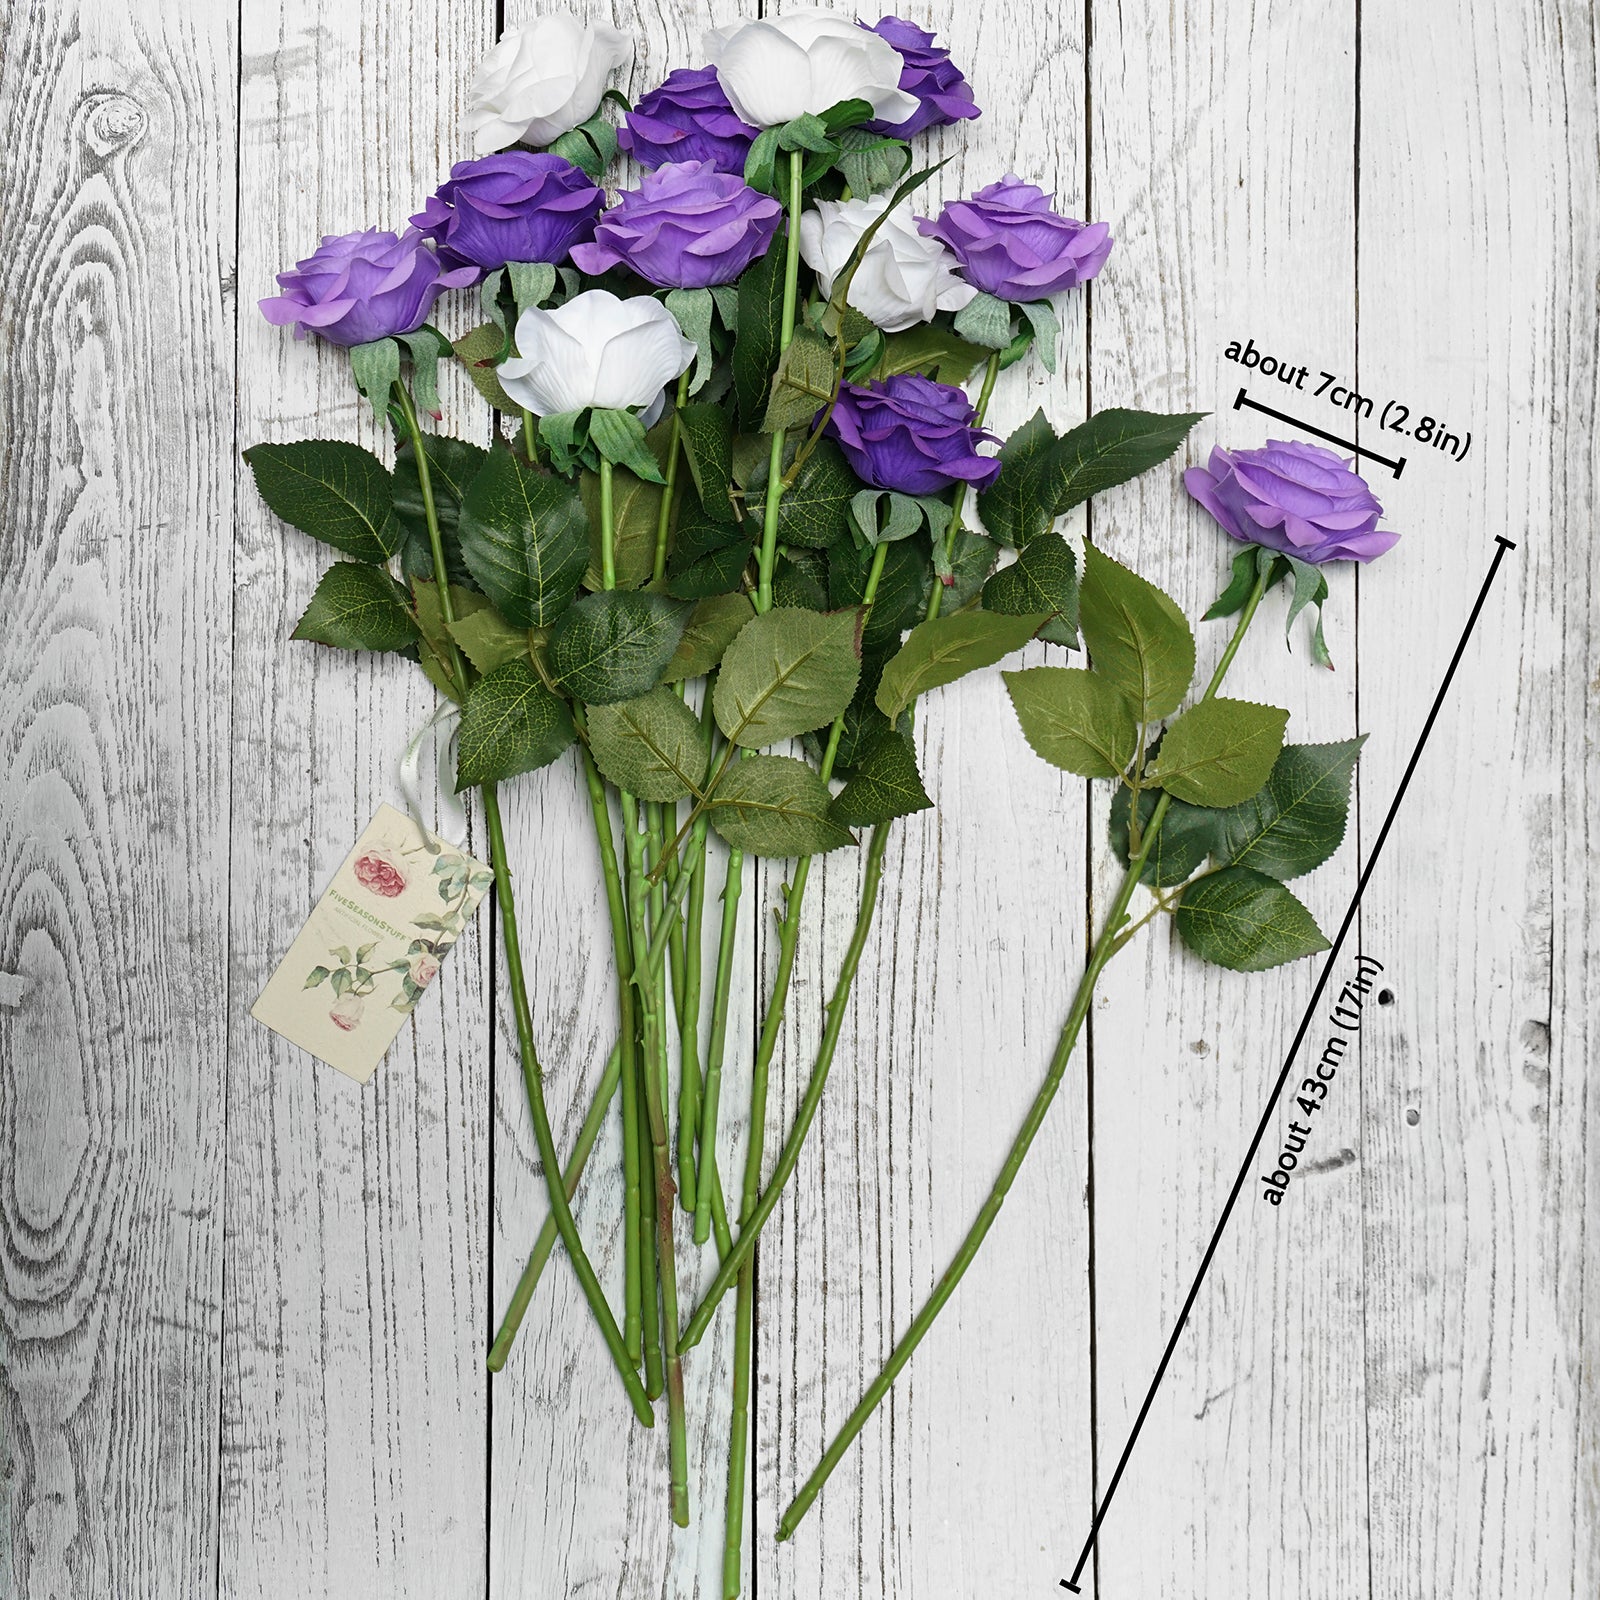 Real Touch 12 Stems Light Purple | White Mix Color Silk Artificial Roses Flowers ‘Petals Feel and Look like Fresh Roses'